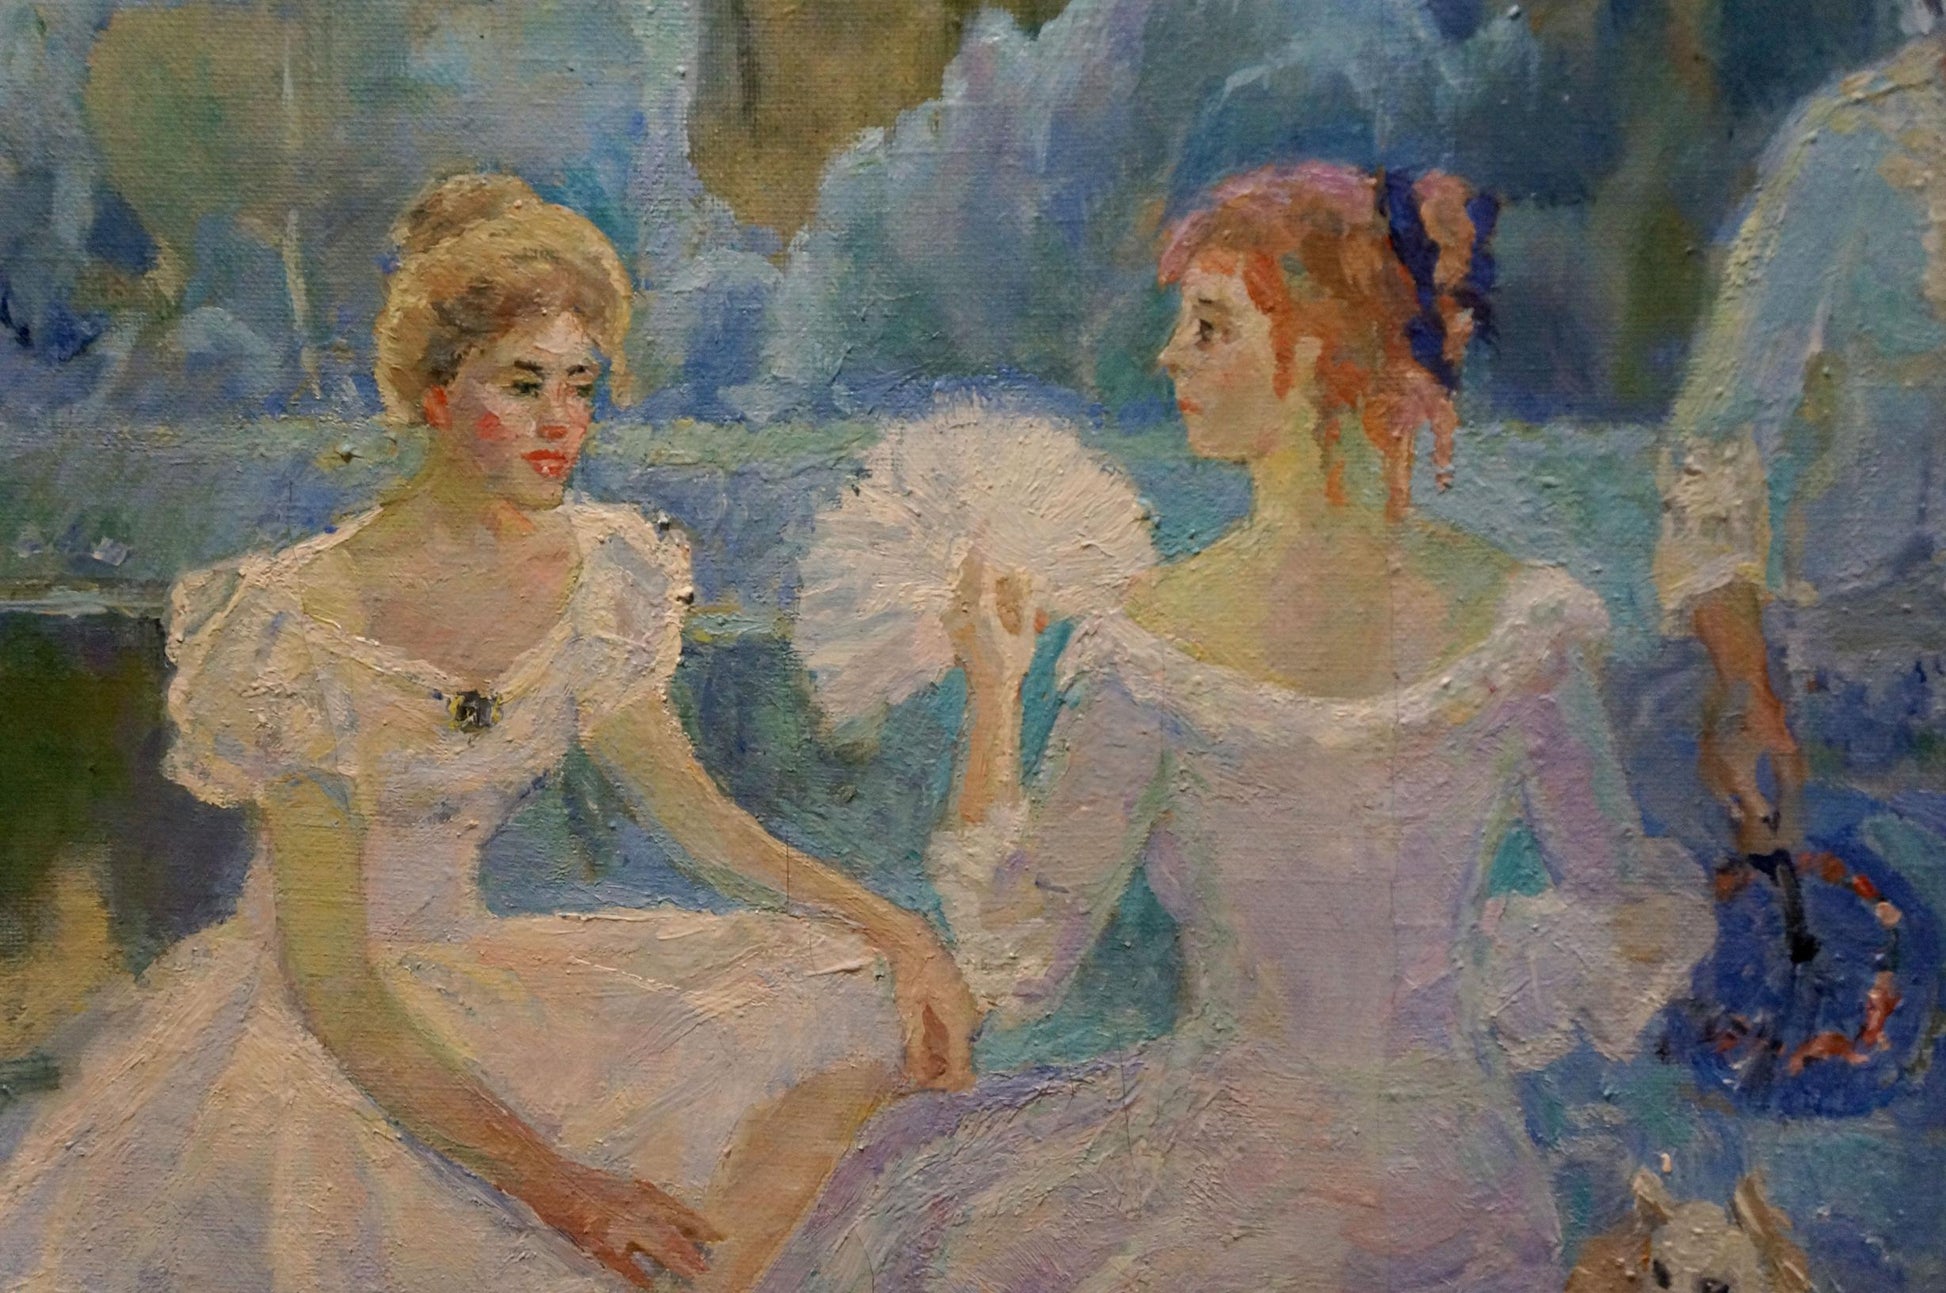 The oil painting "Girls by the Pond" created by Odarka Tytarenko